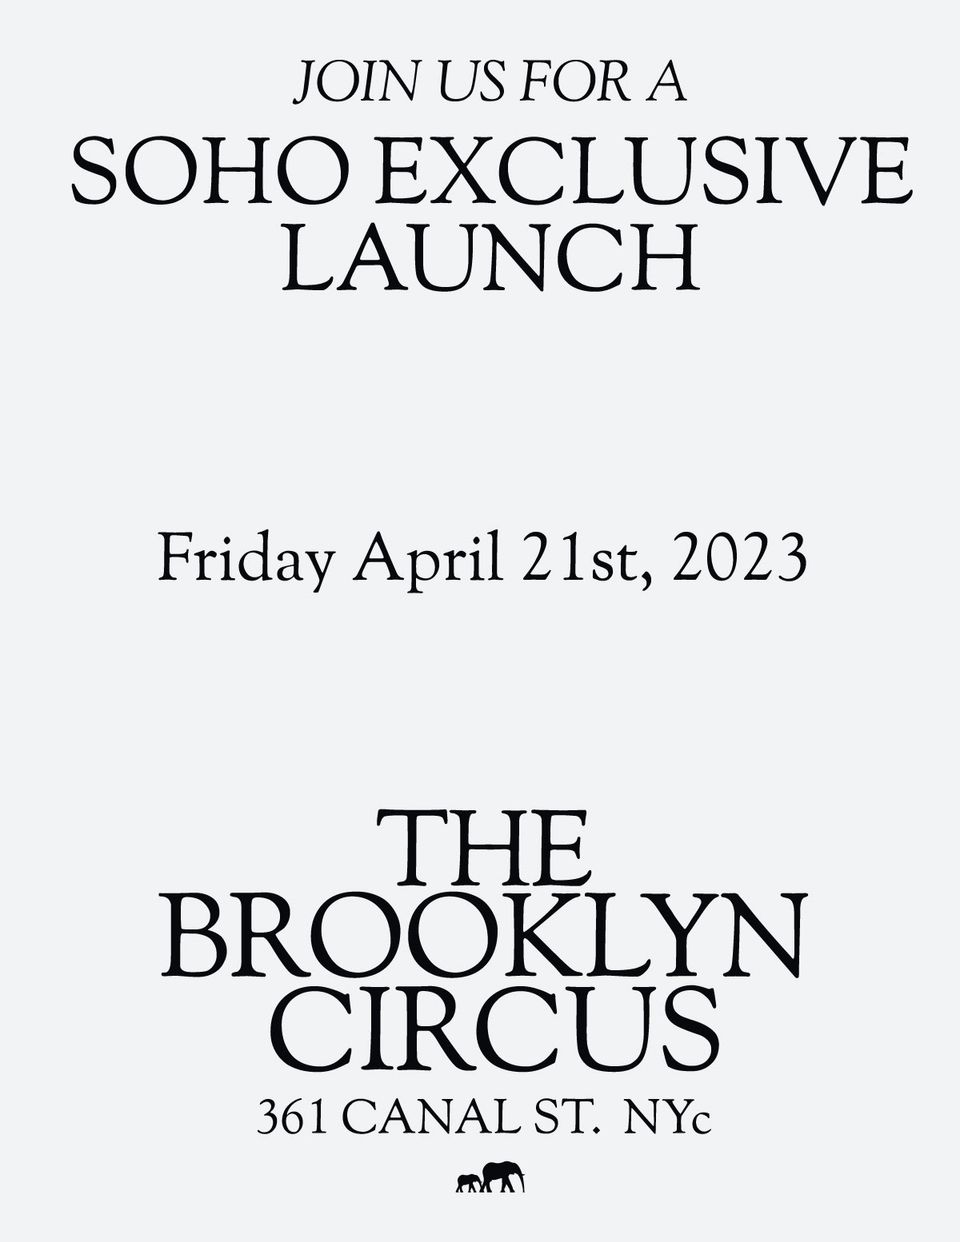 The Brooklyn Circus opens new Manhattan store